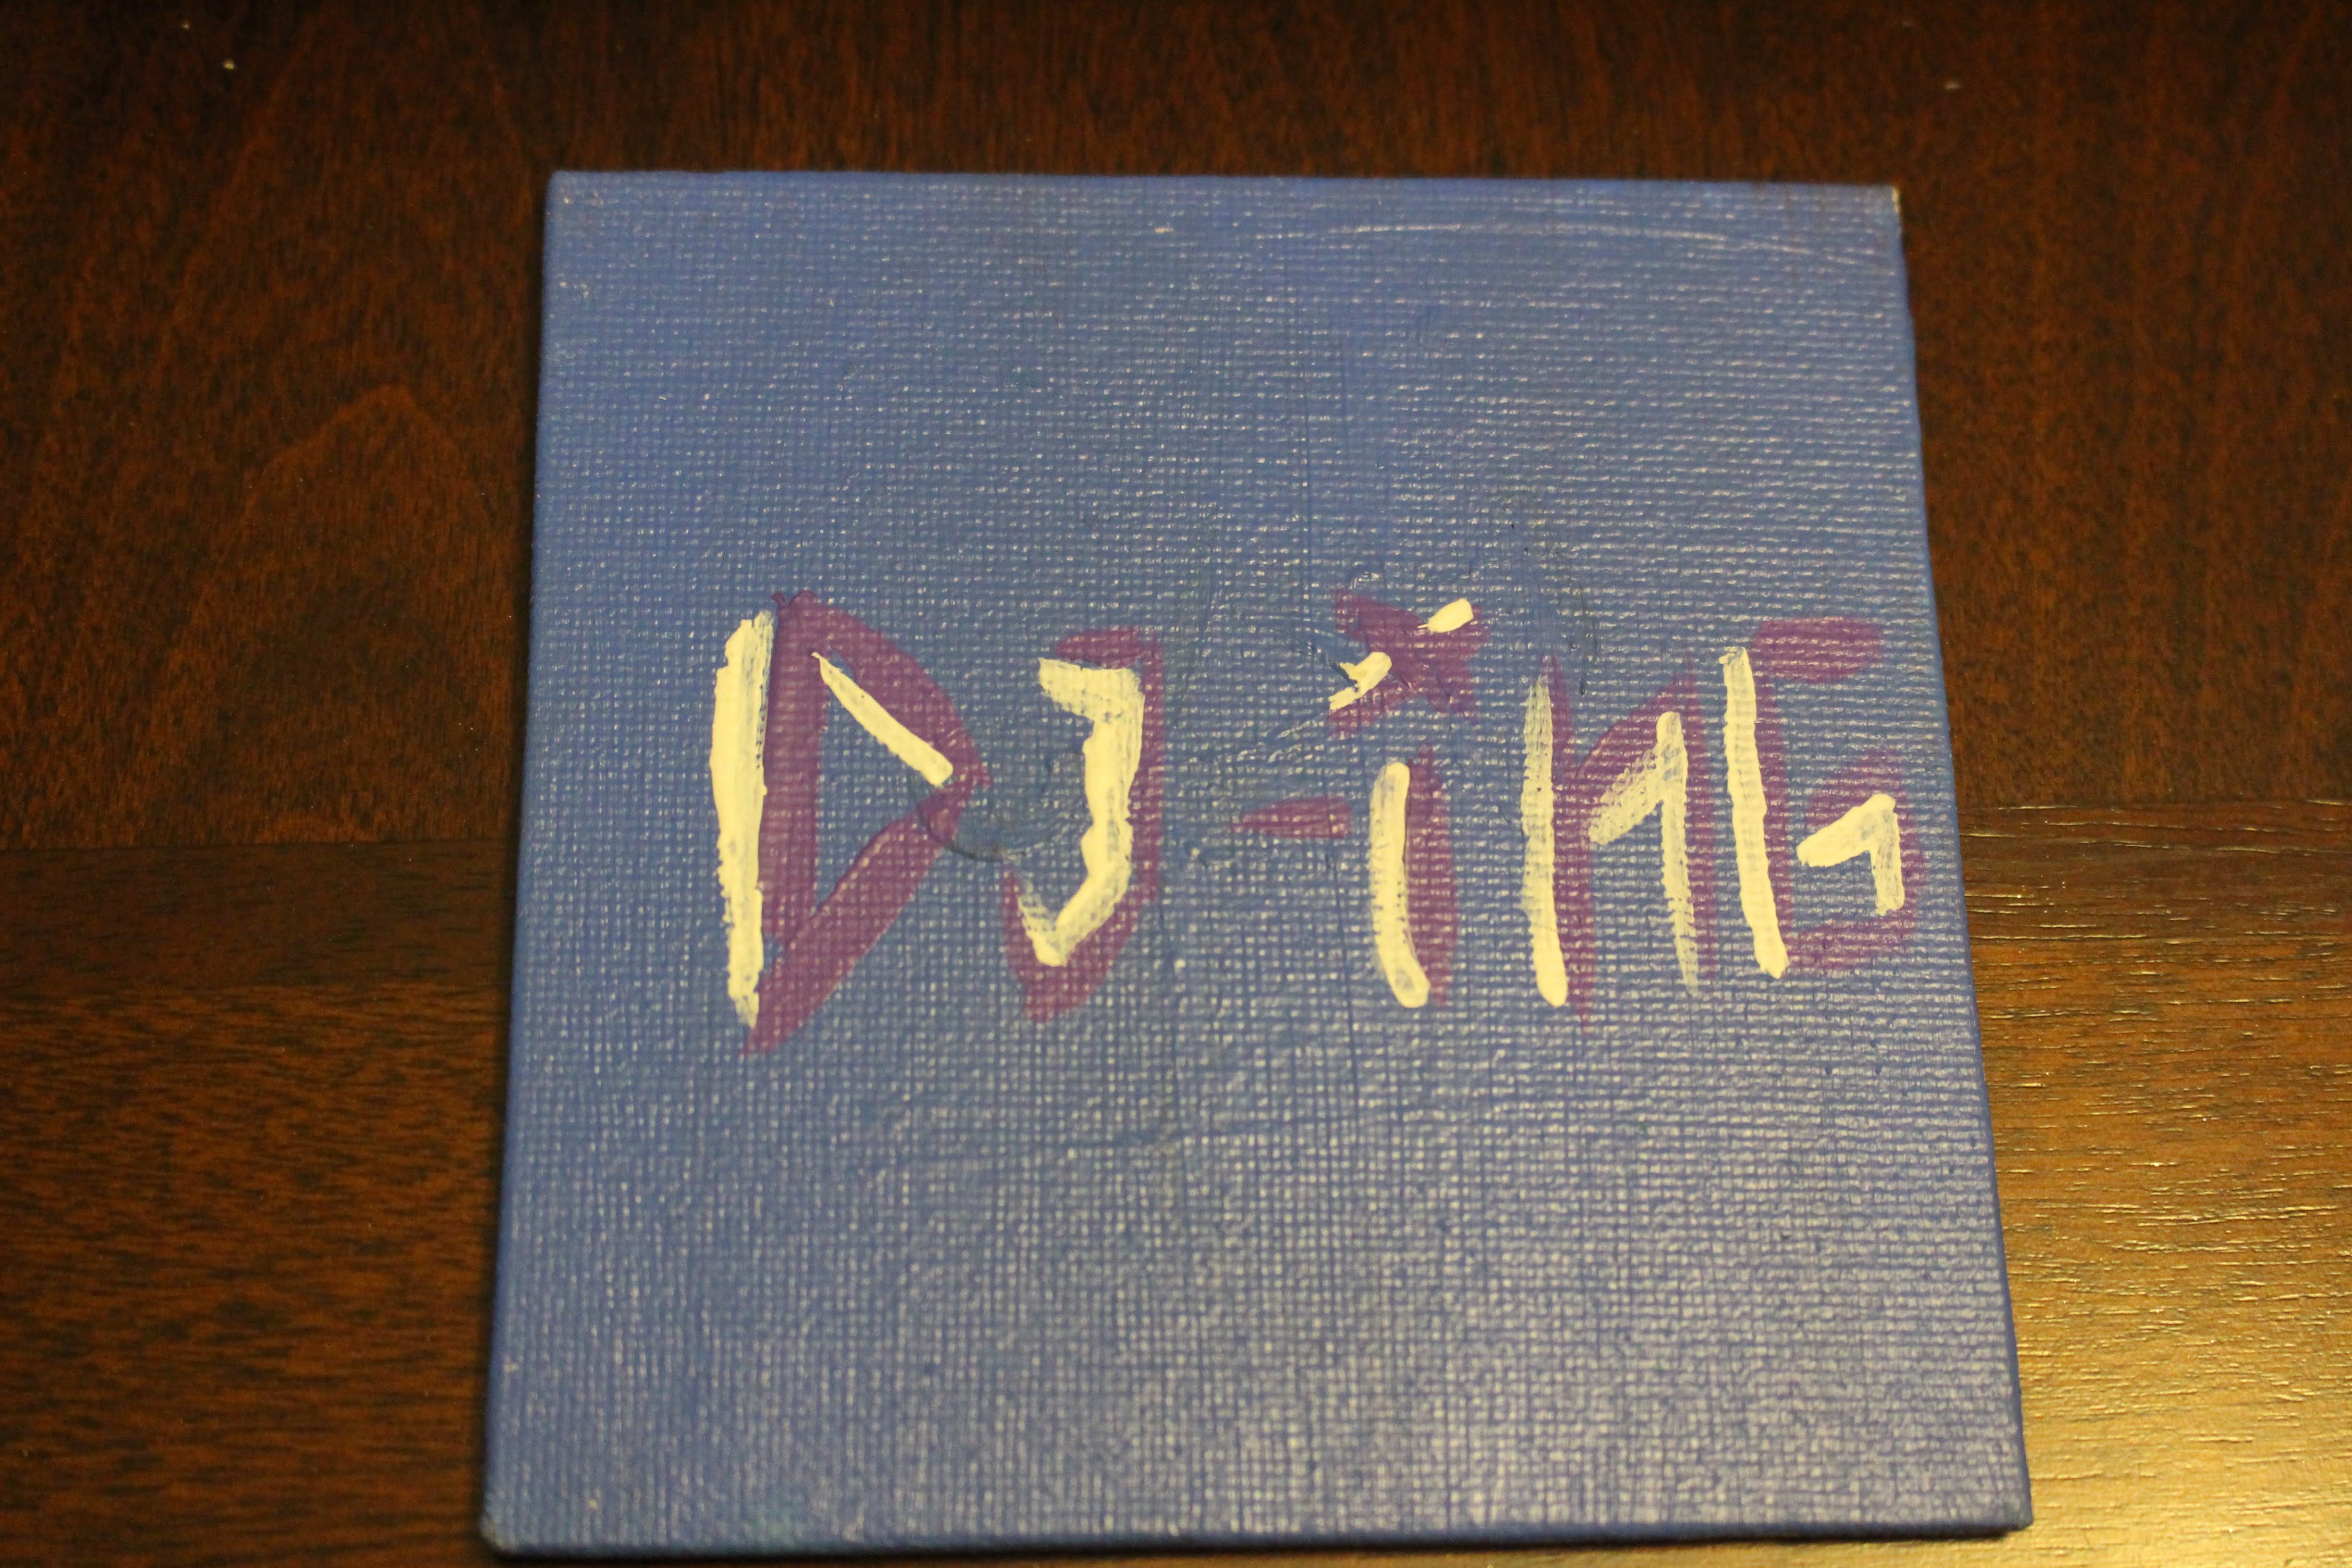 This is a painting of the word ‘dj-ing’ on a mini canvas. This word represents one of the ‘four elements of hip hop”.